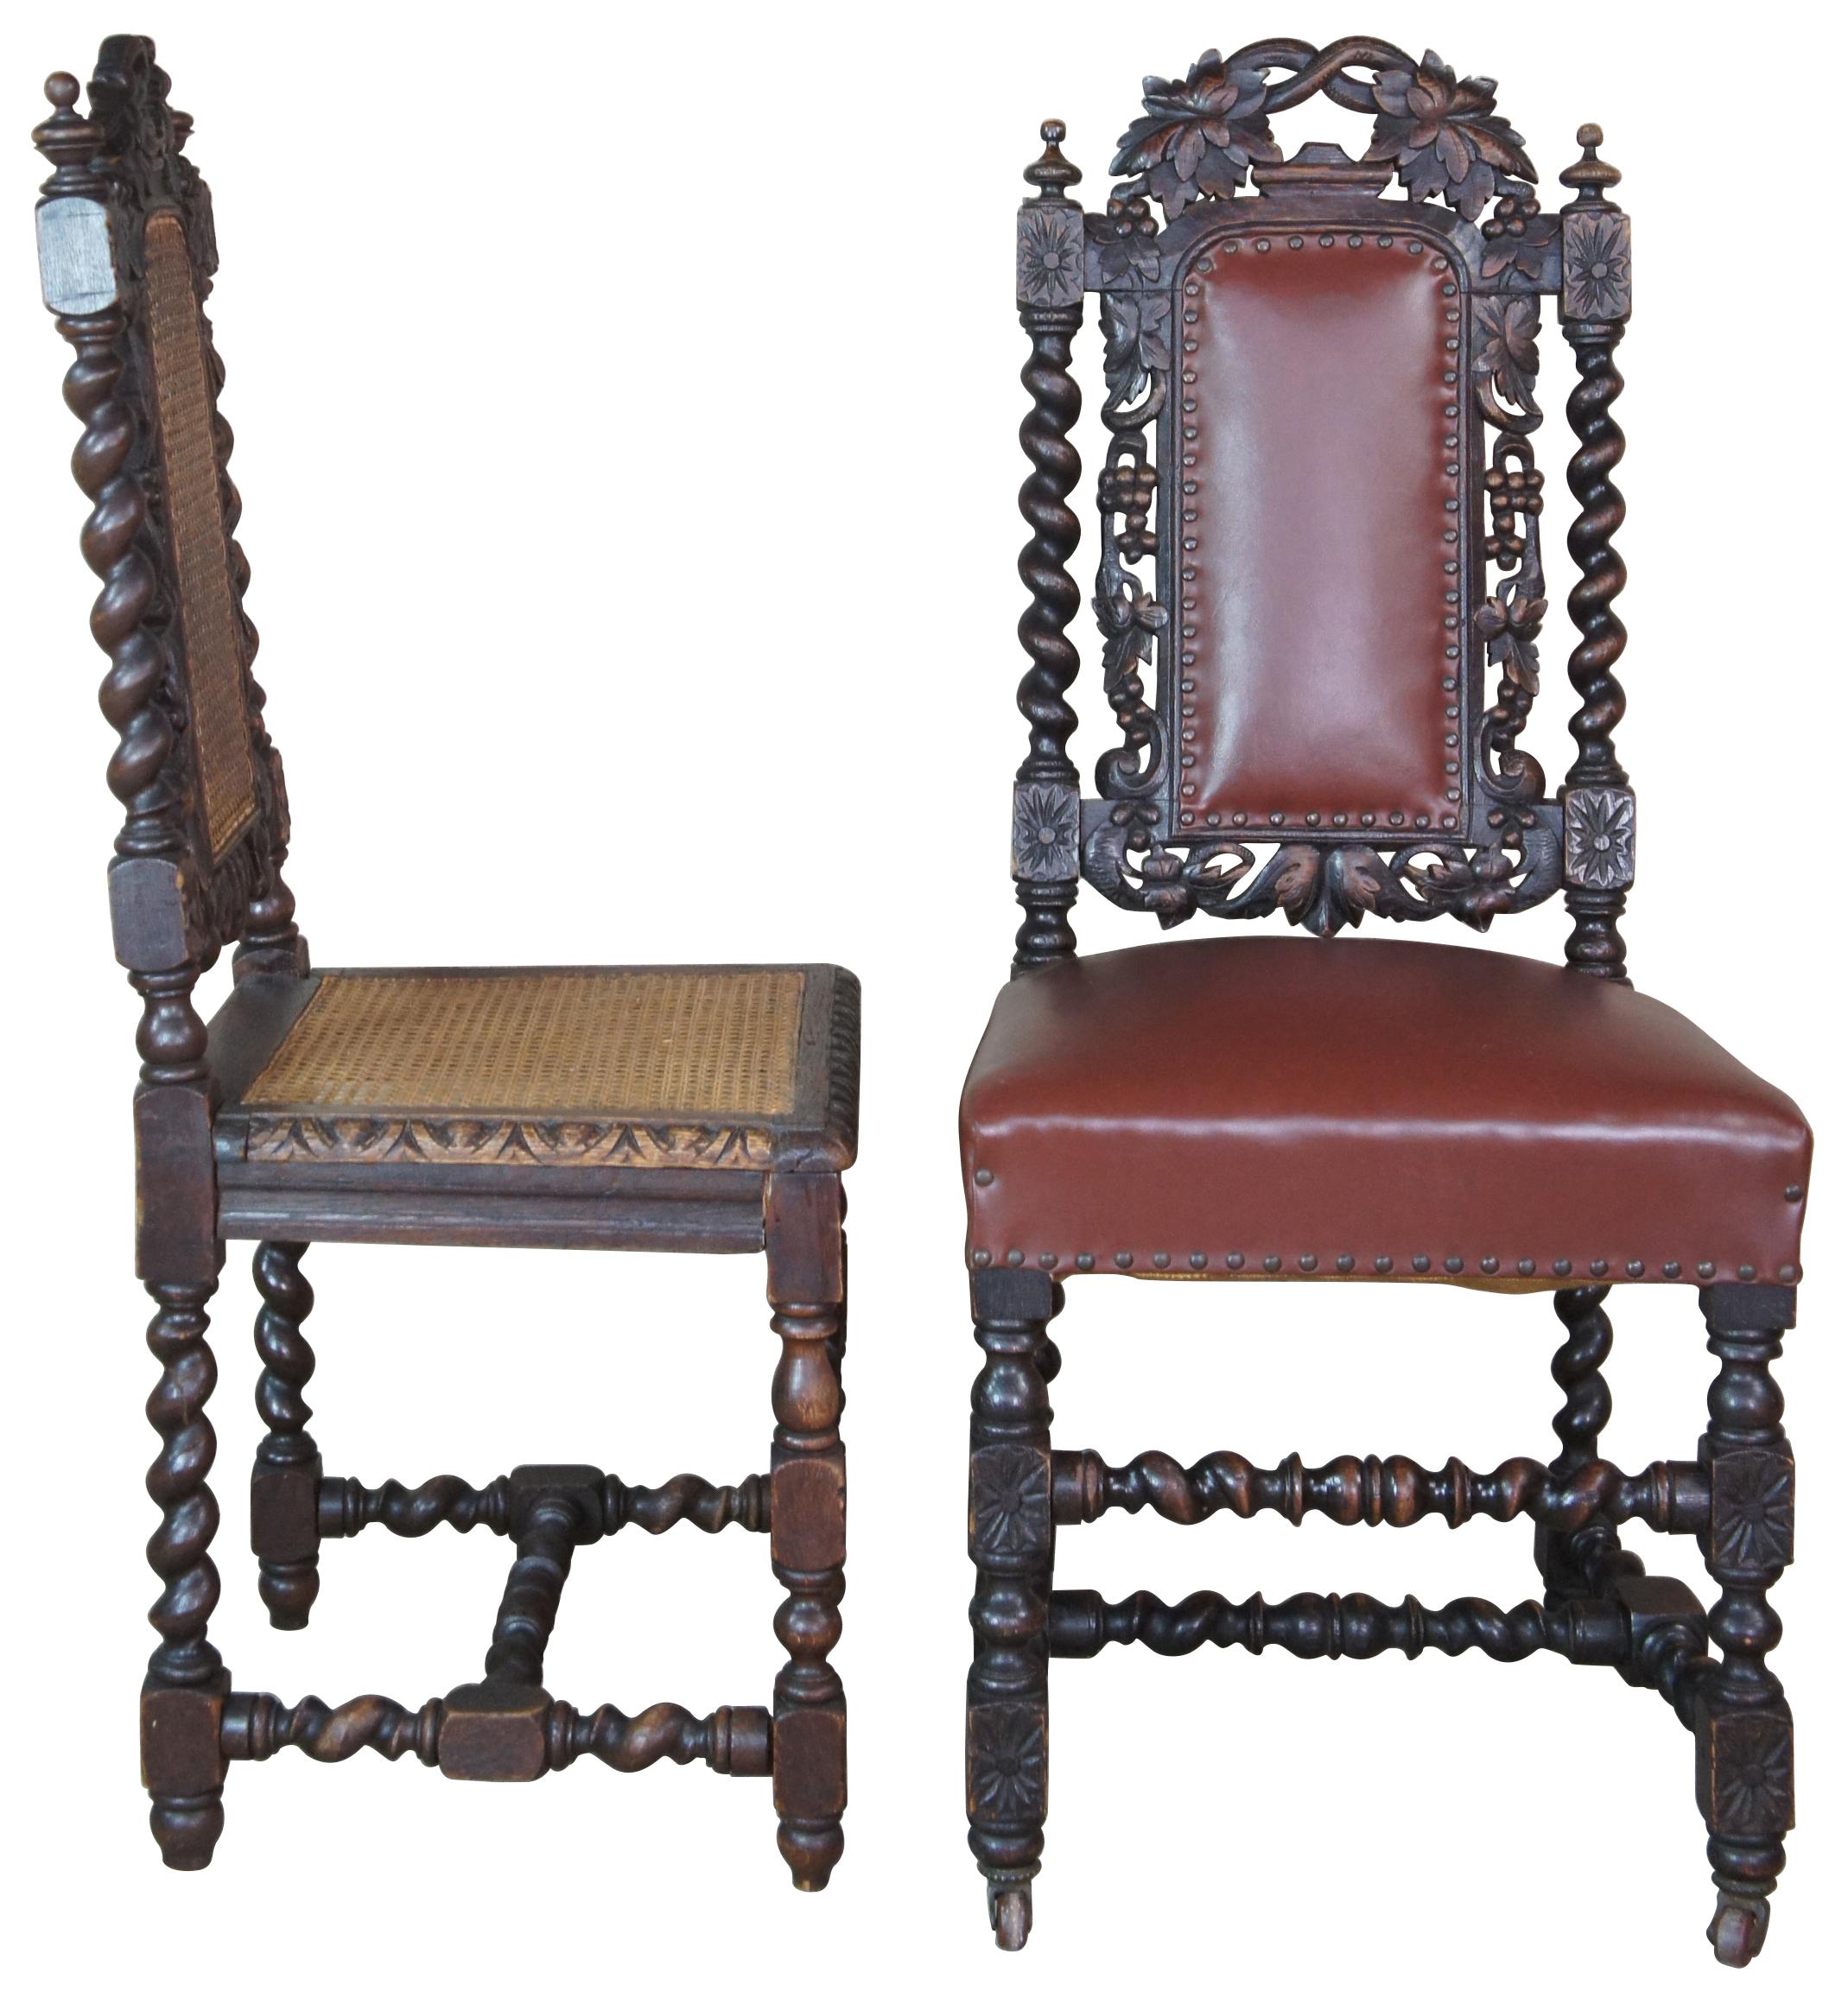 Ten antique Renaissance Revival dining chairs. Made of oak featuring ornate berry / leaf / floral carvings with barley twisted supports and caning with leather and nailhead trim.

Measures: Leather 18.5